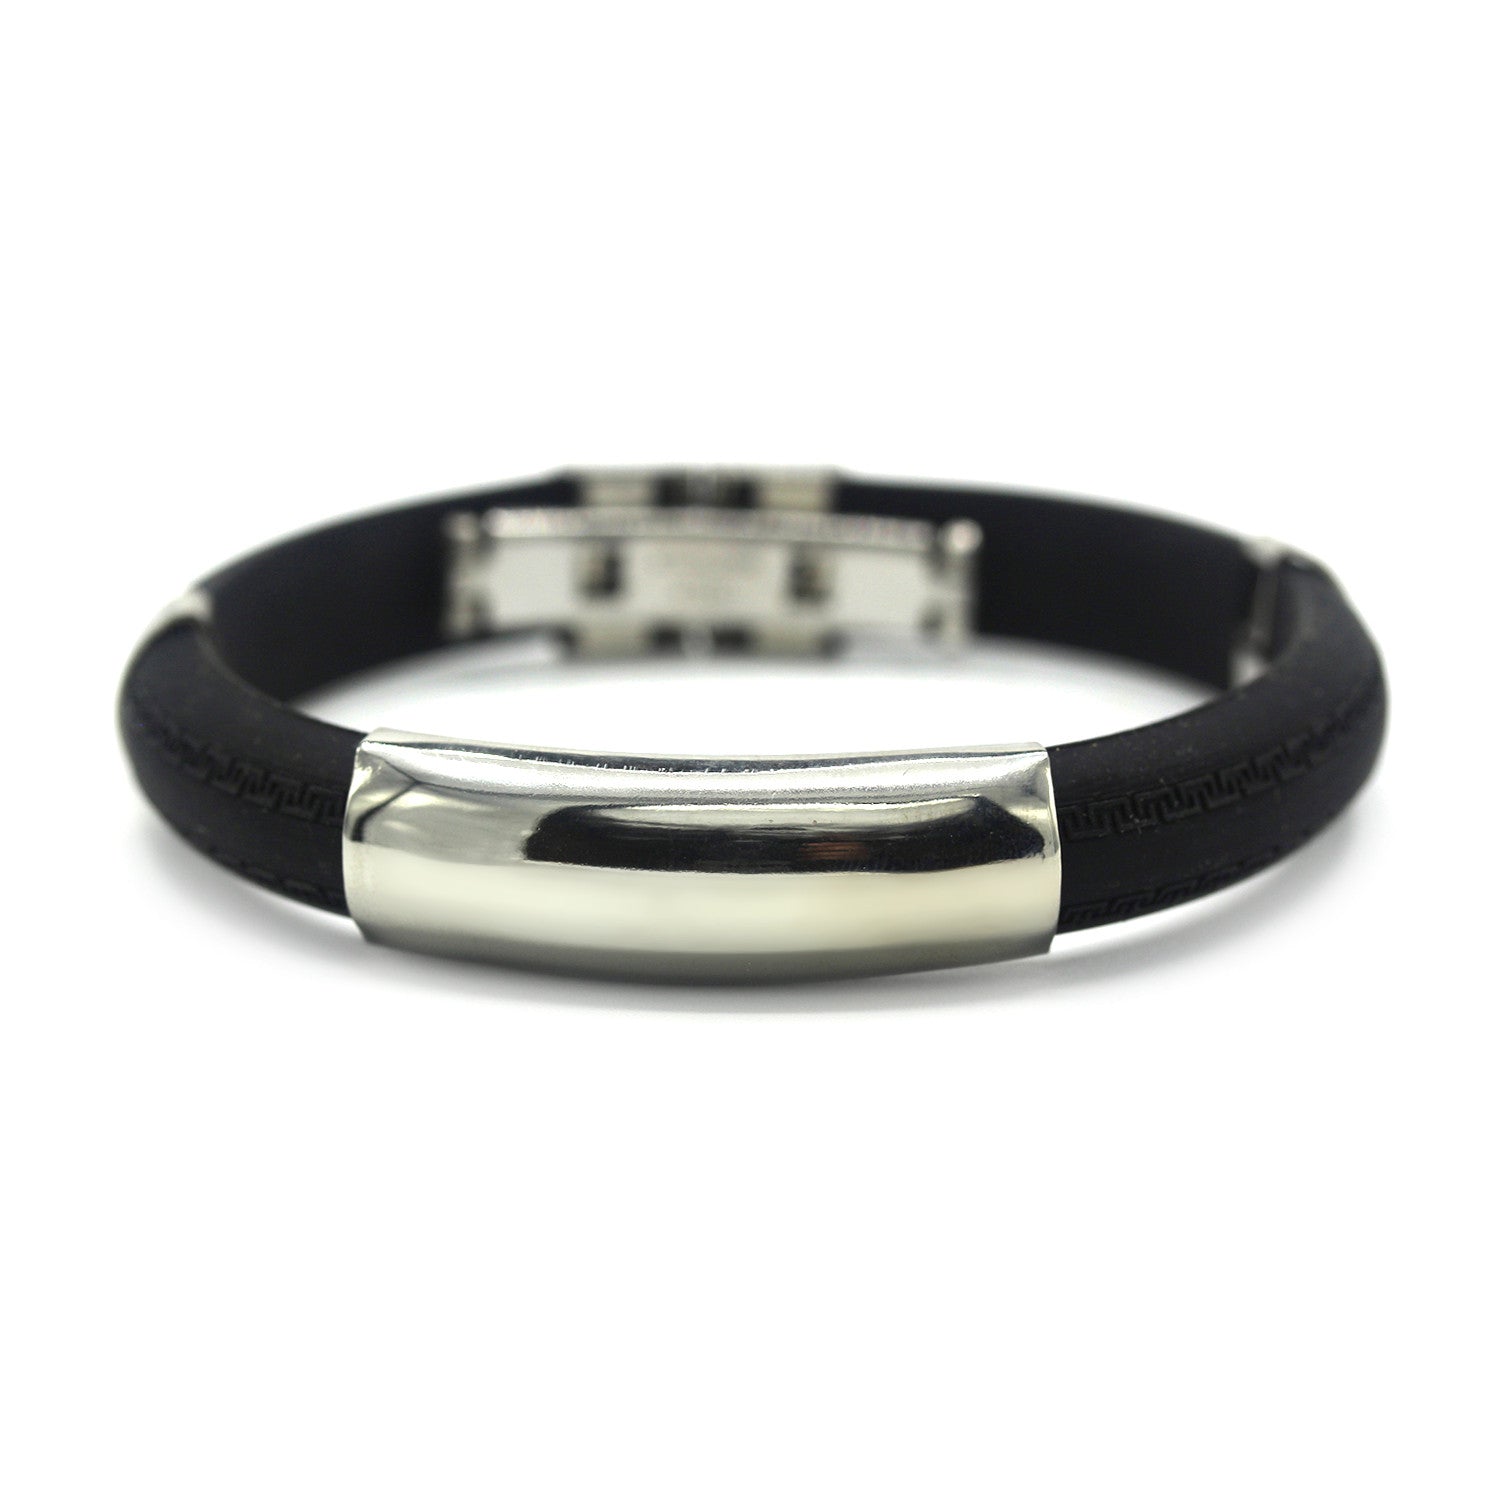 Modest Rubber Bracelet Stainless Steel Accents Dual Hinge Clasp (Silver)